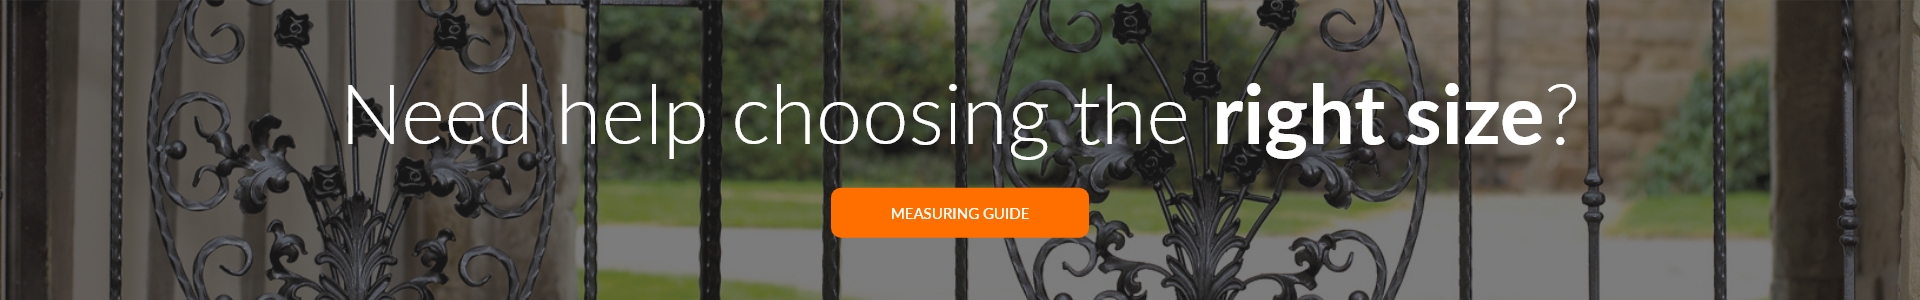 Click here to view the measuring guide